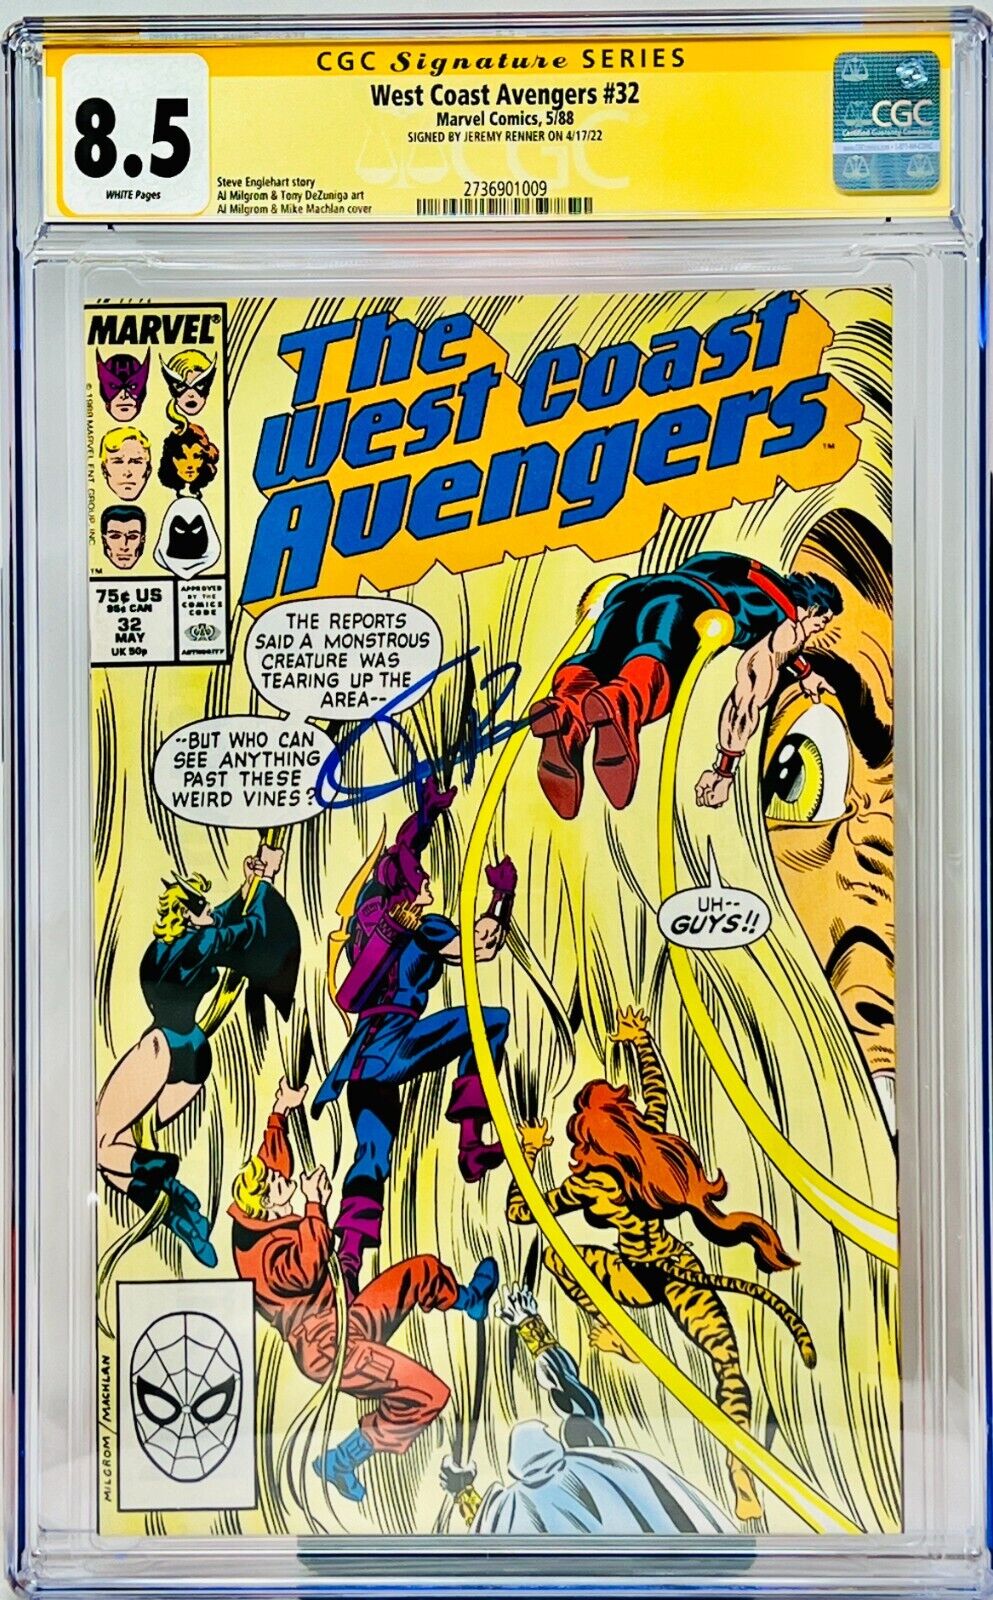 CGC Signature Series Graded 8.5 West Coast Avengers #32 Signed by Jeremy Renner